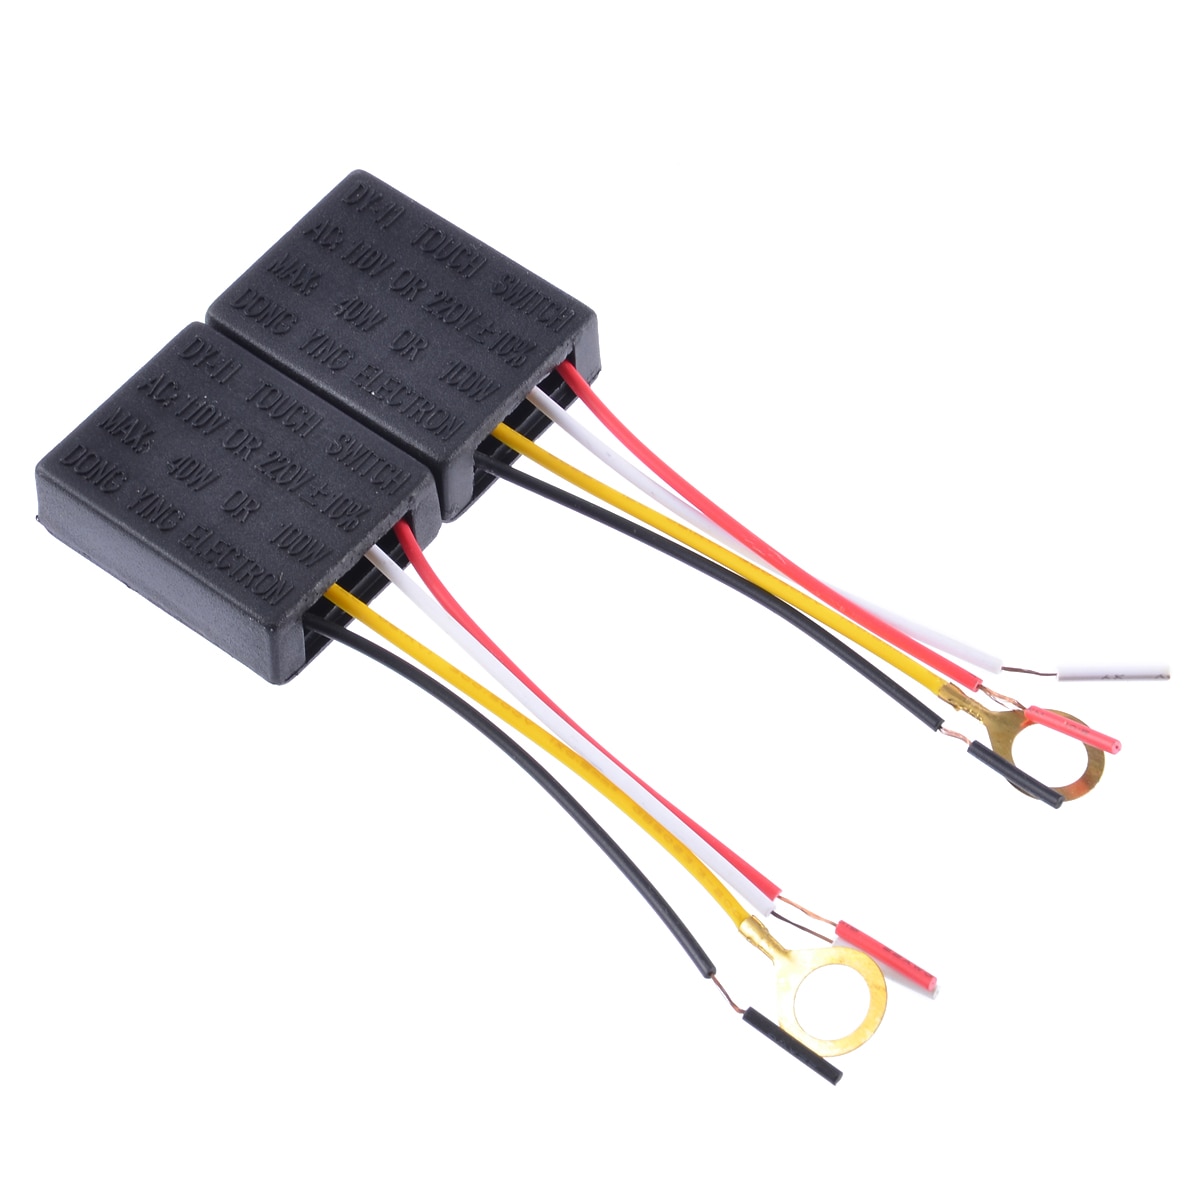 3-Way Touch Switch Sensors Pair